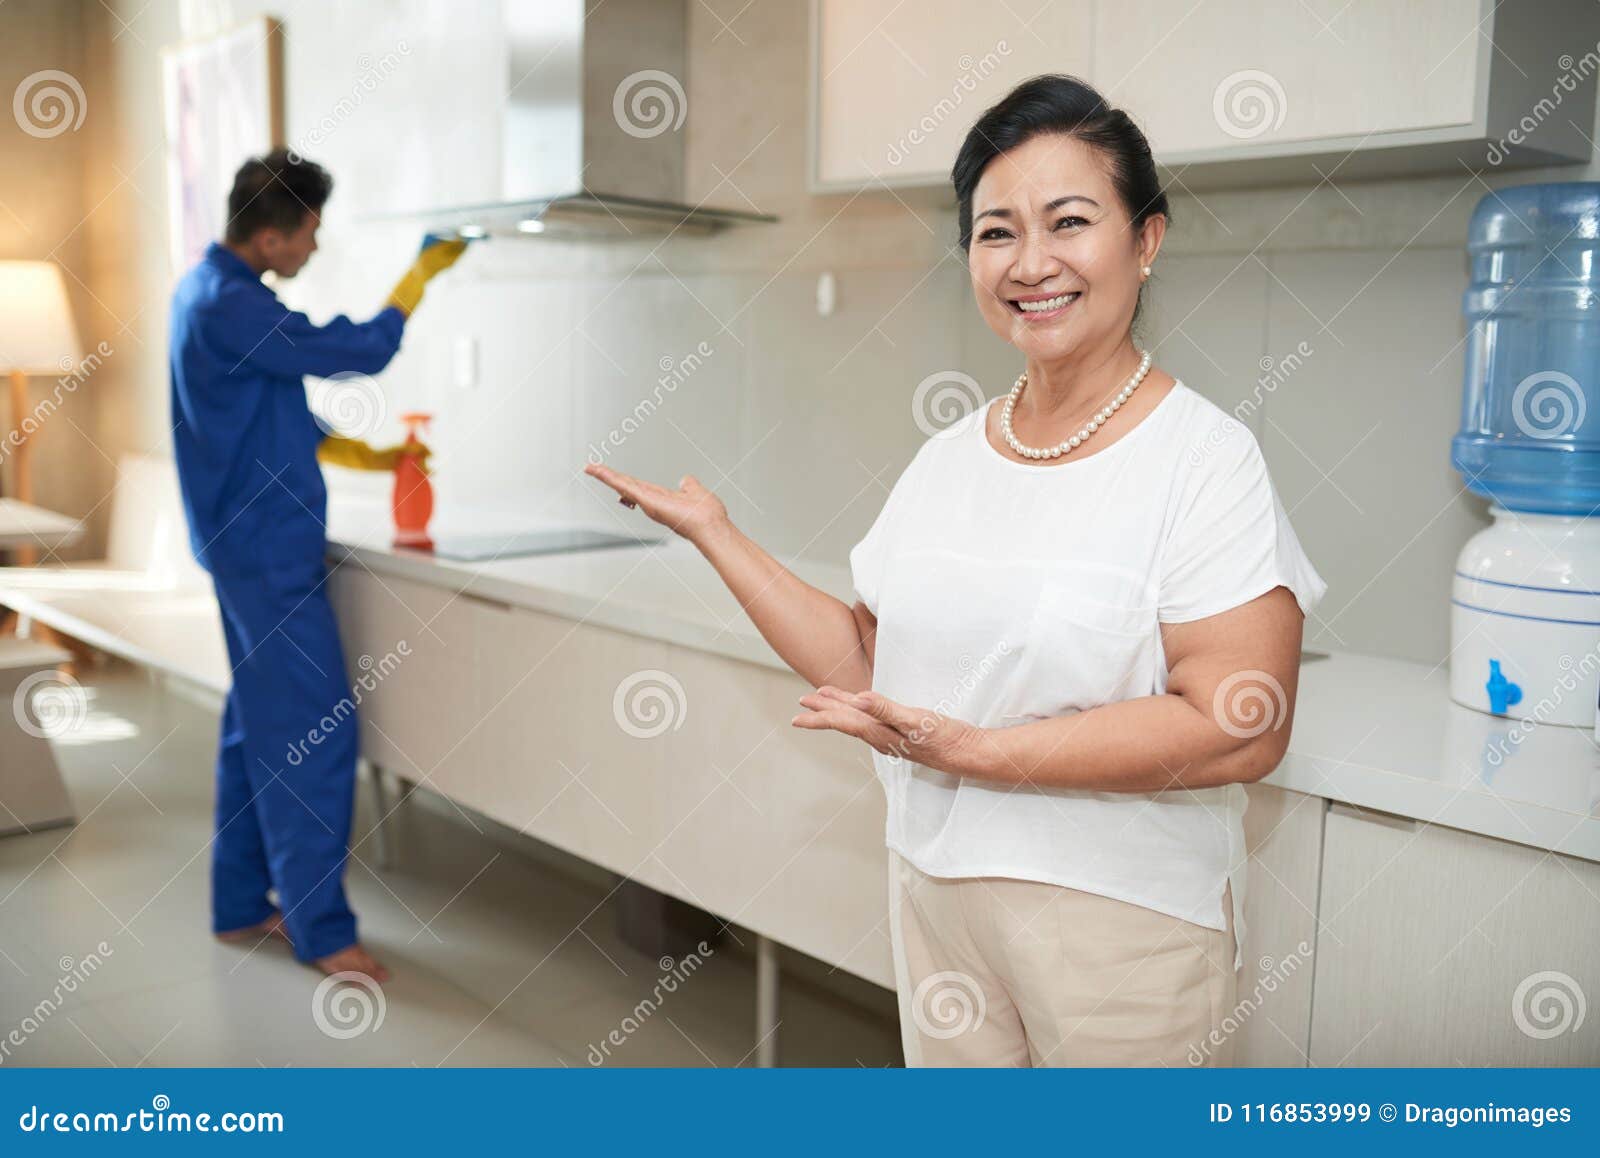 asian housewife and plumber